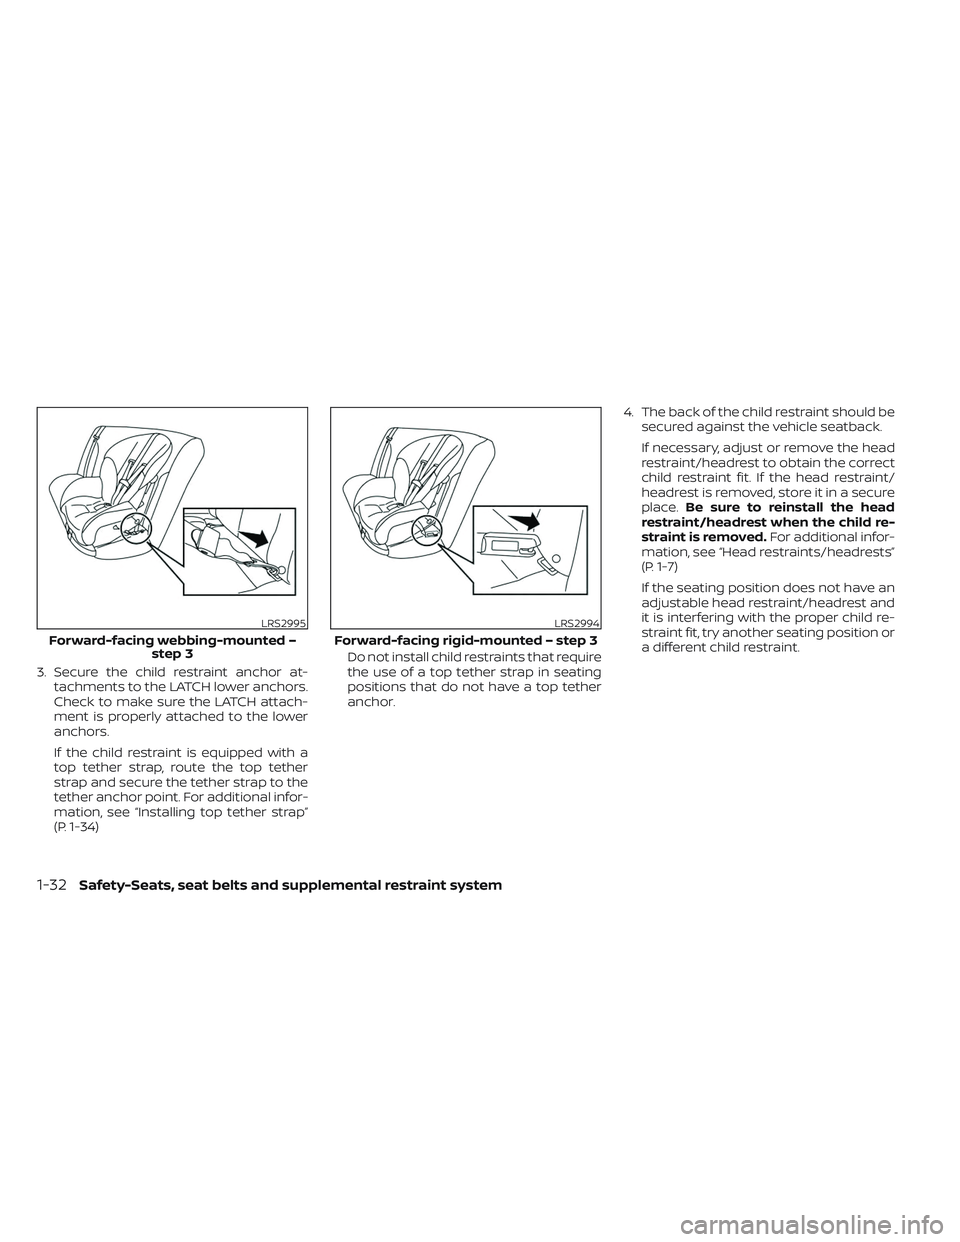 NISSAN MAXIMA 2023 Workshop Manual 3. Secure the child restraint anchor at-tachments to the LATCH lower anchors.
Check to make sure the LATCH attach-
ment is properly attached to the lower
anchors.
If the child restraint is equipped wi